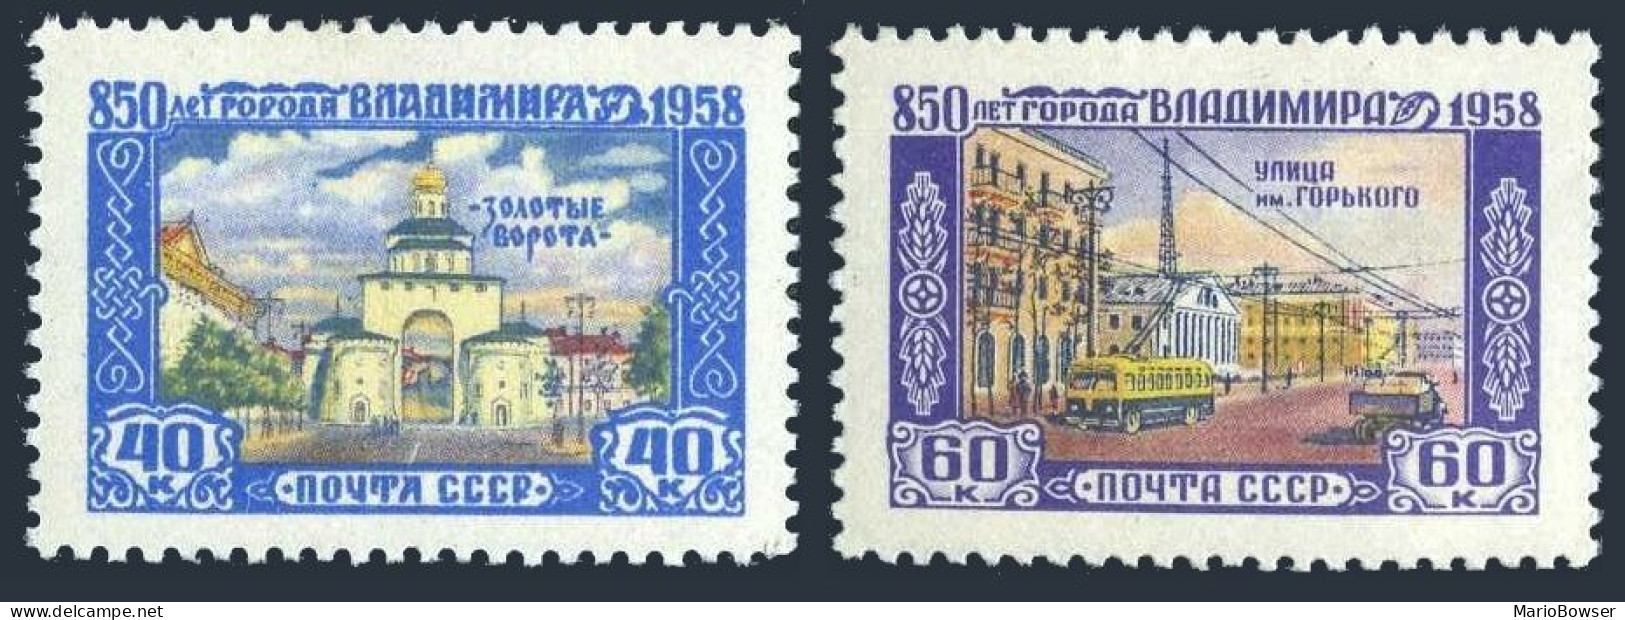 Russia 2108-2109, MNH. Michel 2135-2136. City Of Vladimir, 800th Ann. 1958. - Unused Stamps